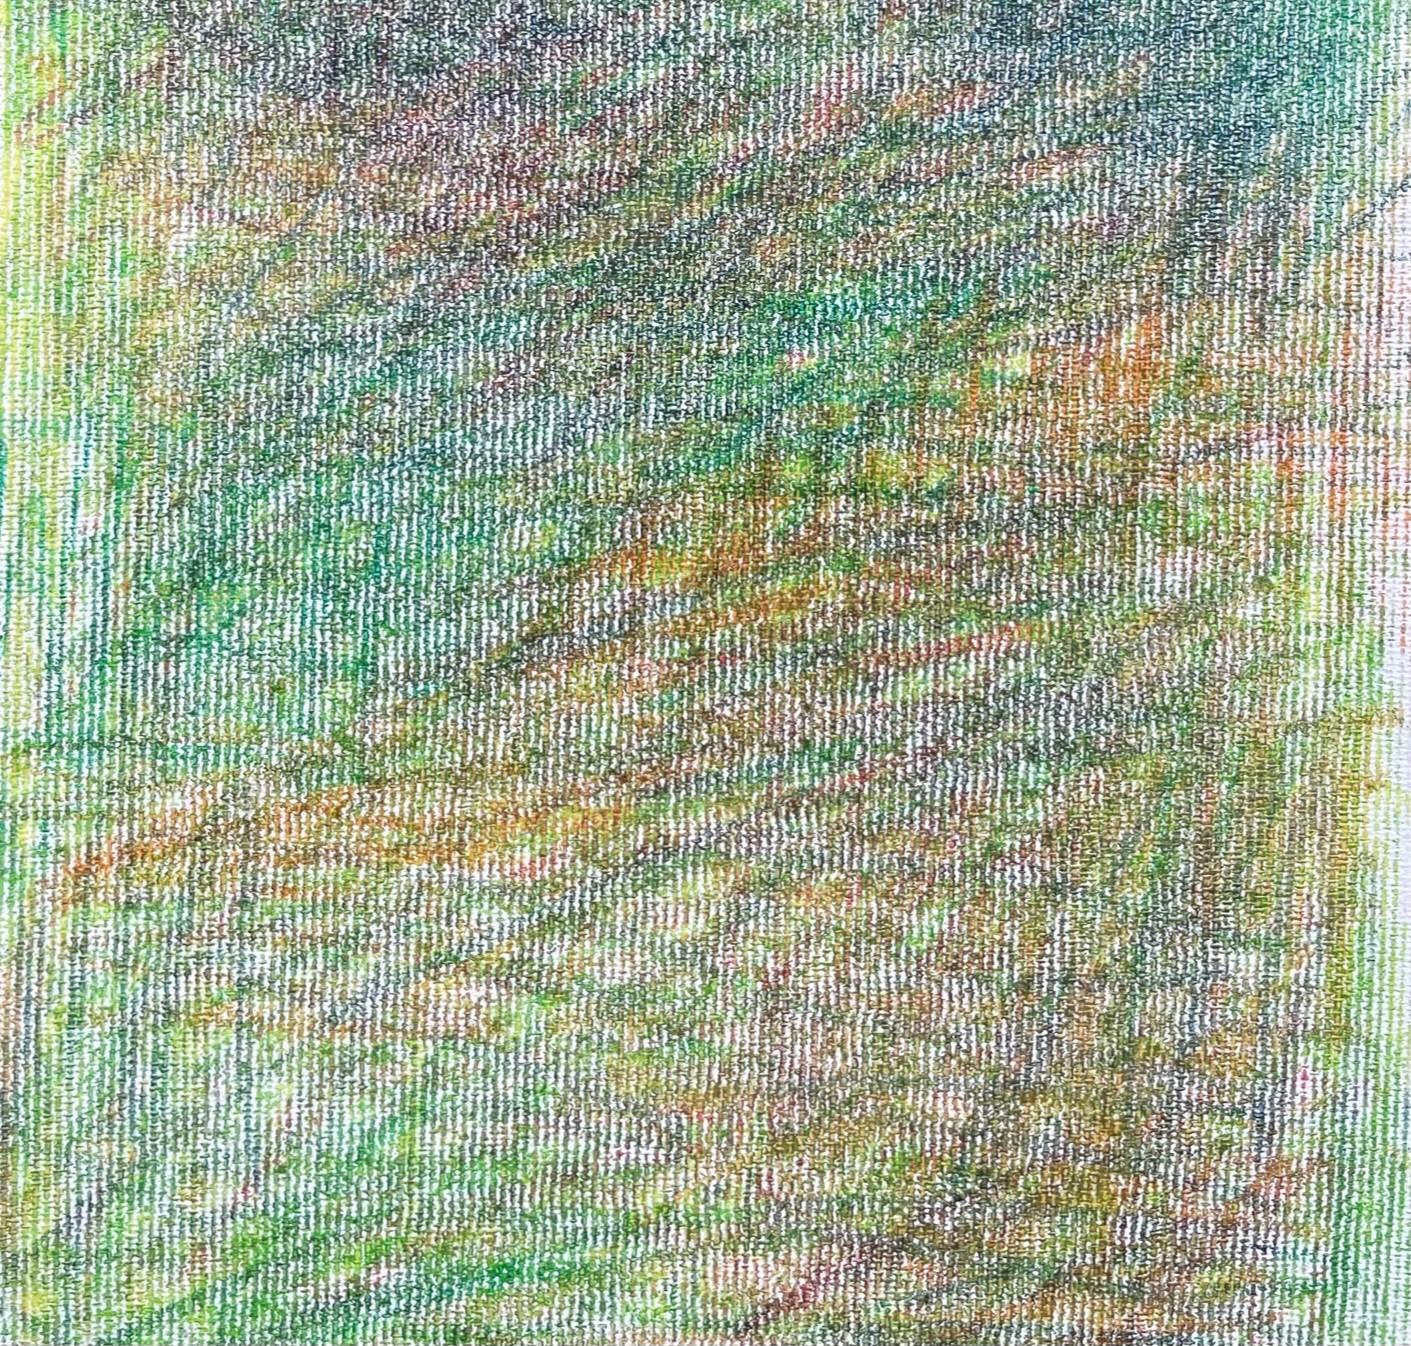 Body in the Field #8 - Green, Landscape, Drawing, Pencils - Expressionist Art by Zsolt Berszán